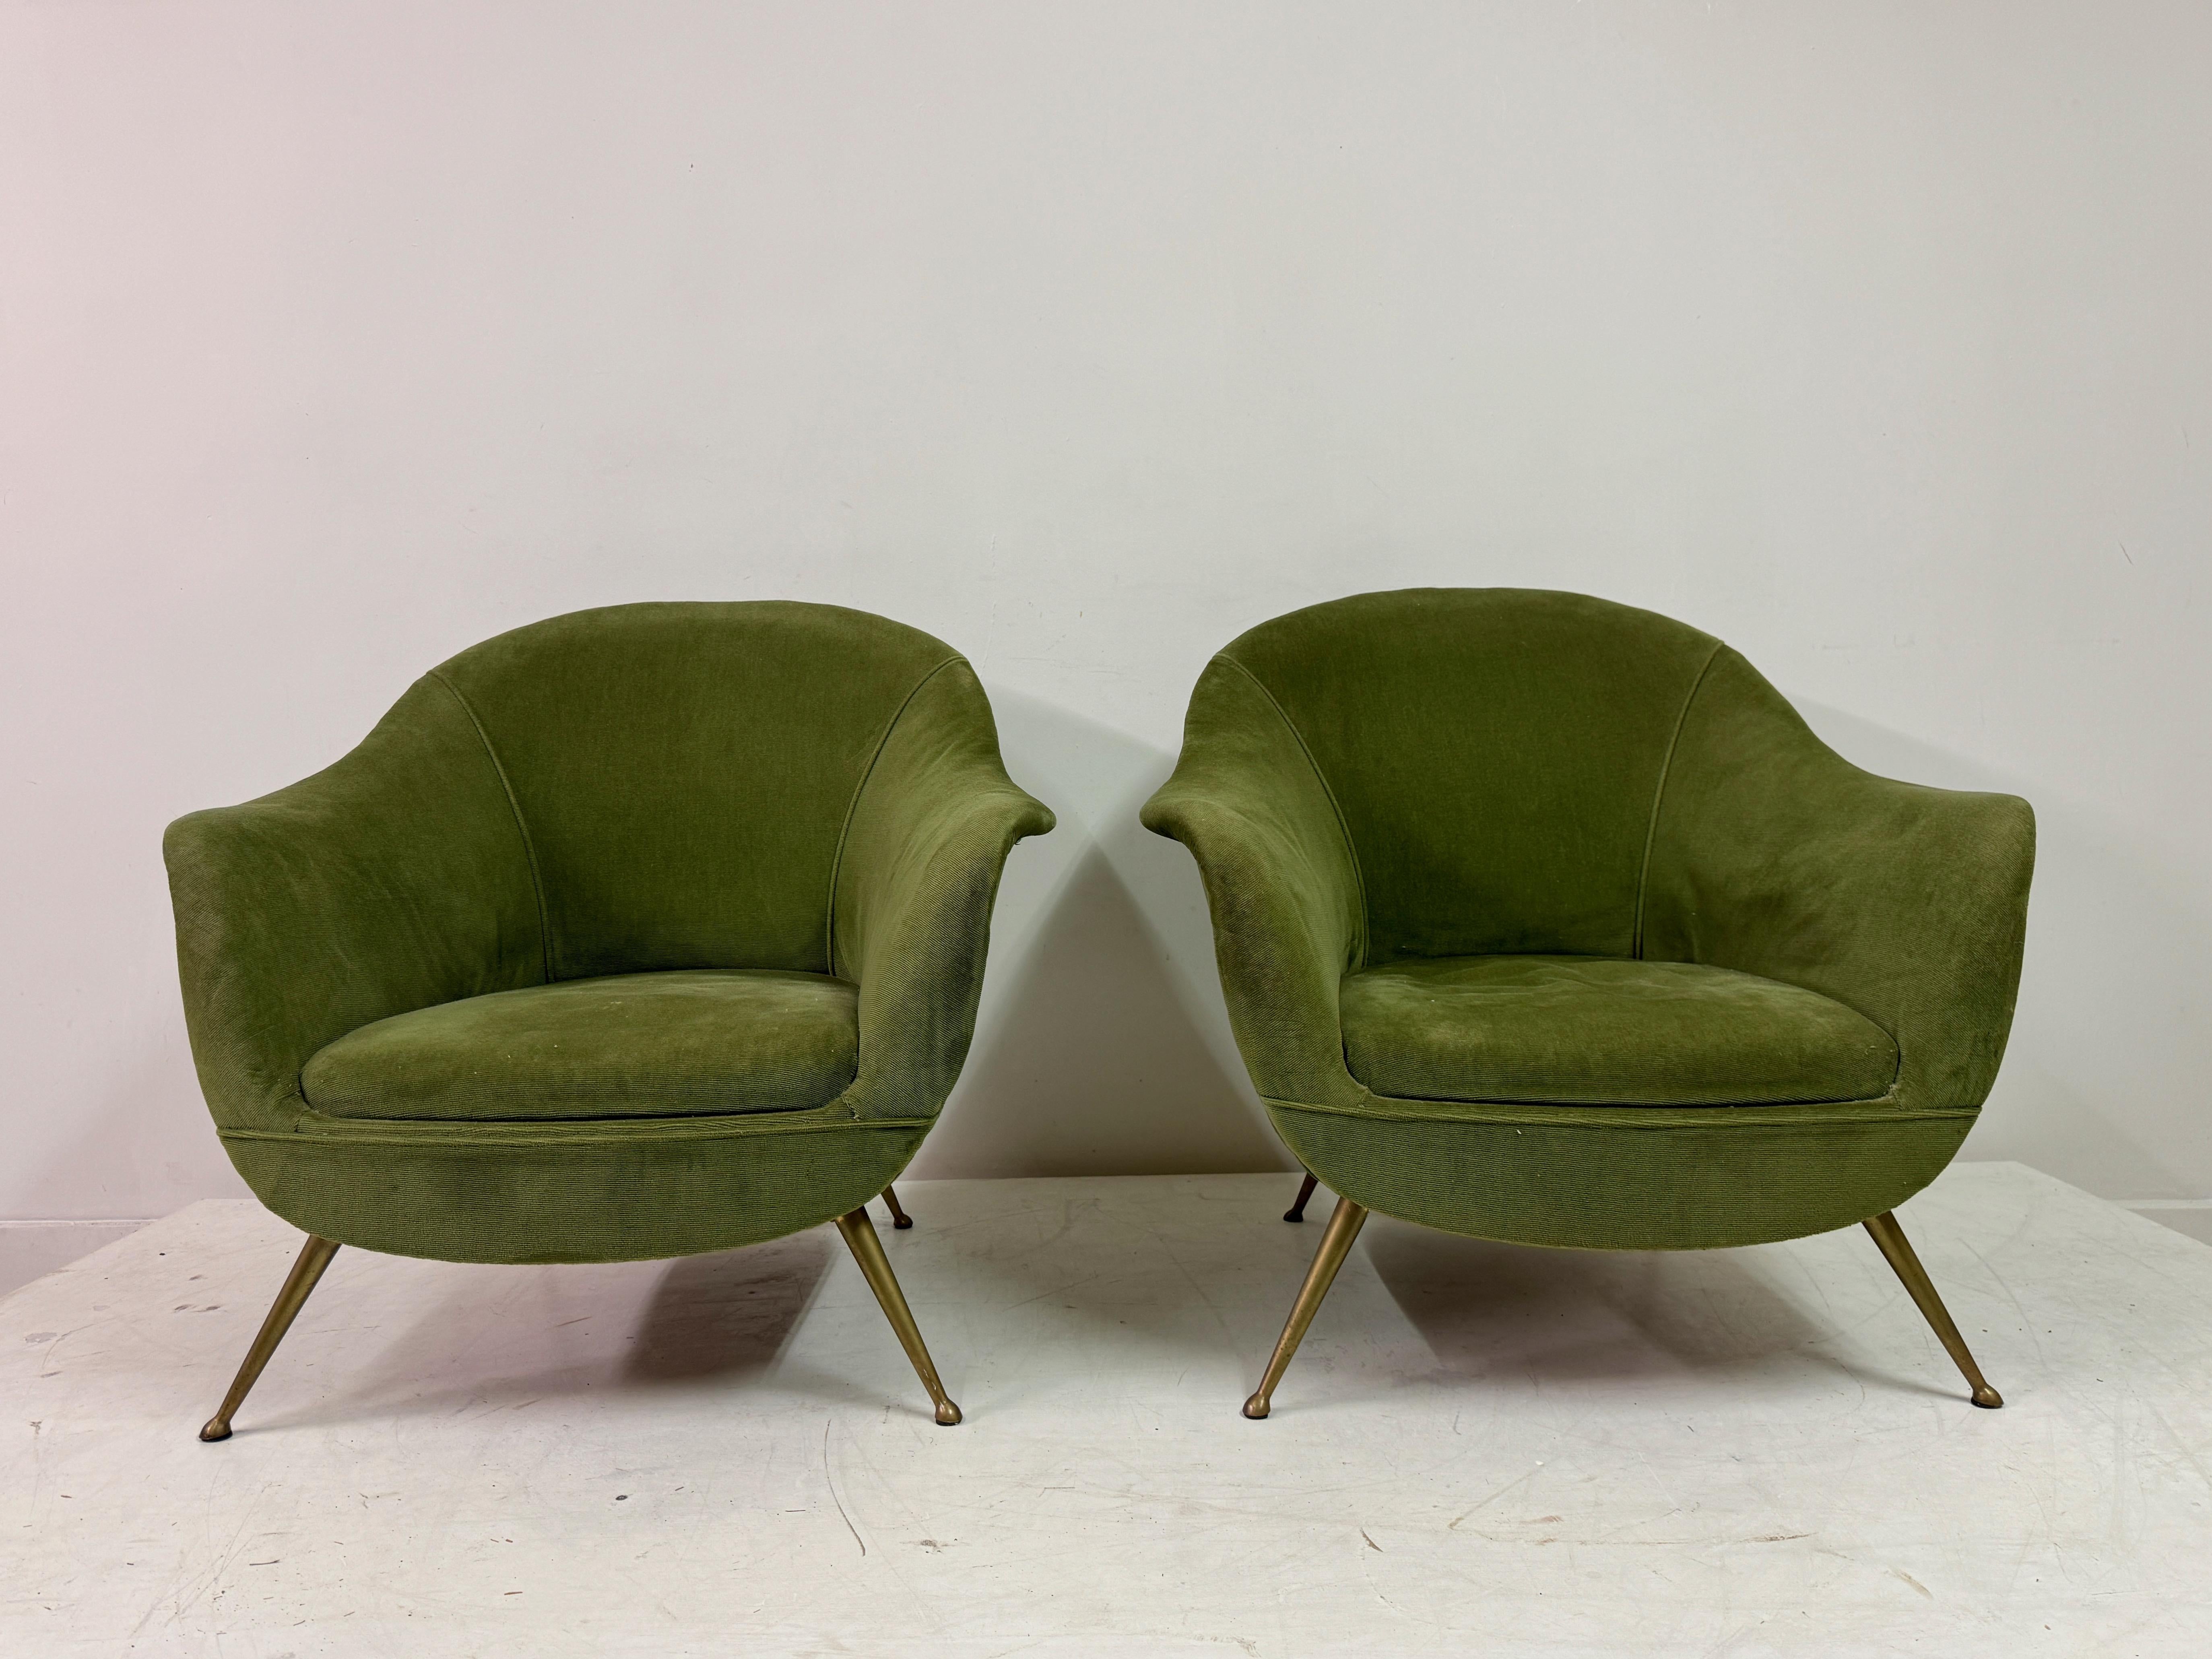 Pair Of 1960s Italian Armchairs In Fair Condition For Sale In London, London